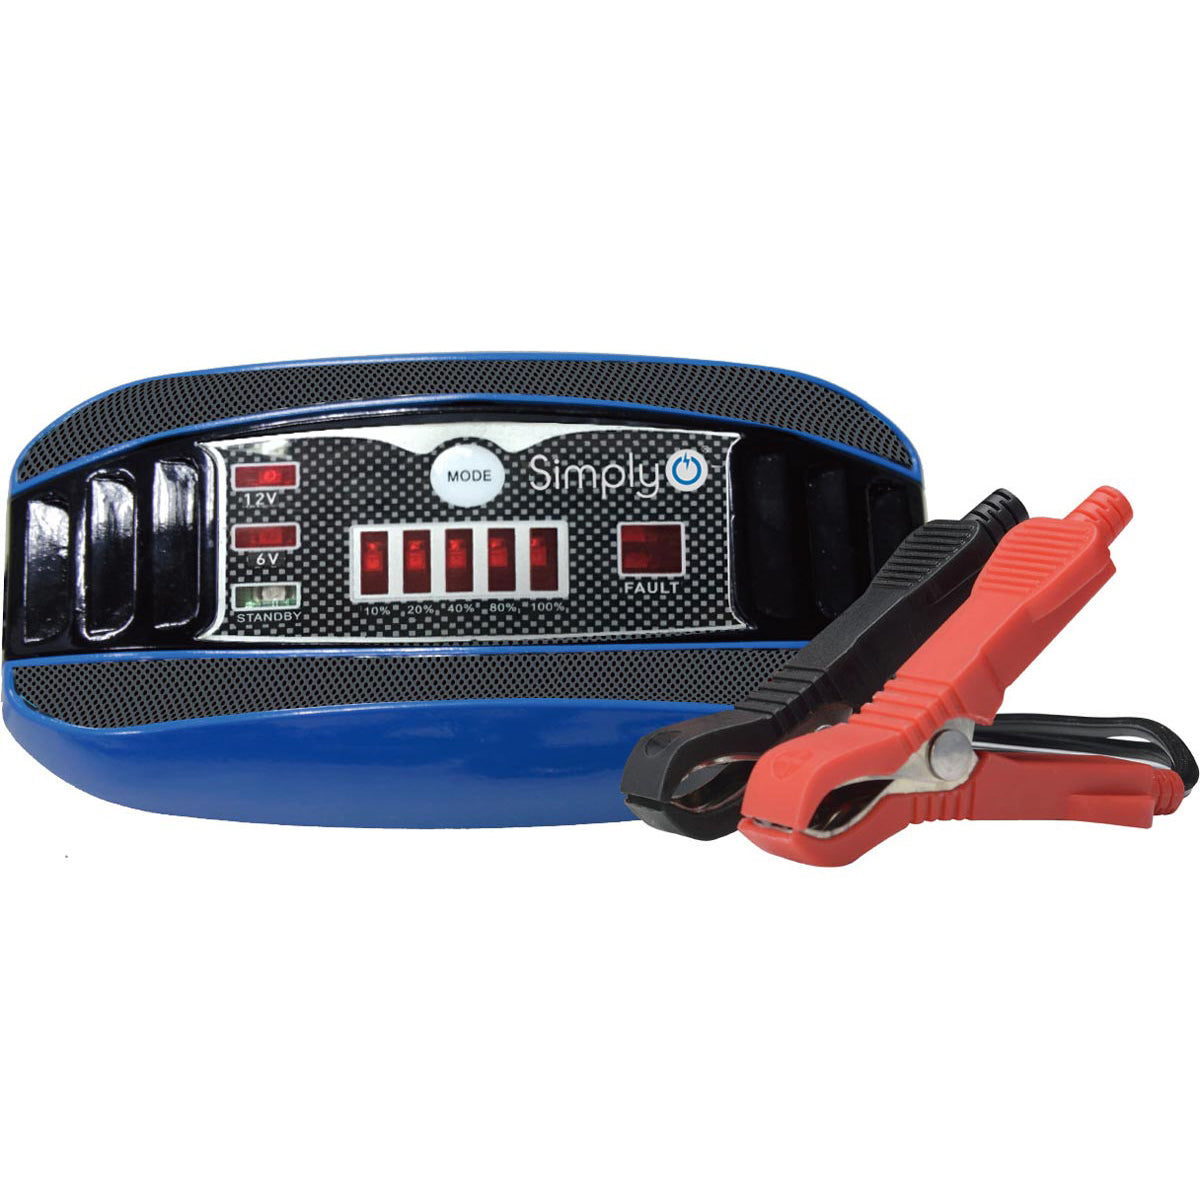 Simply 6/12v 1a Smart Charger 10-30ah - Blue